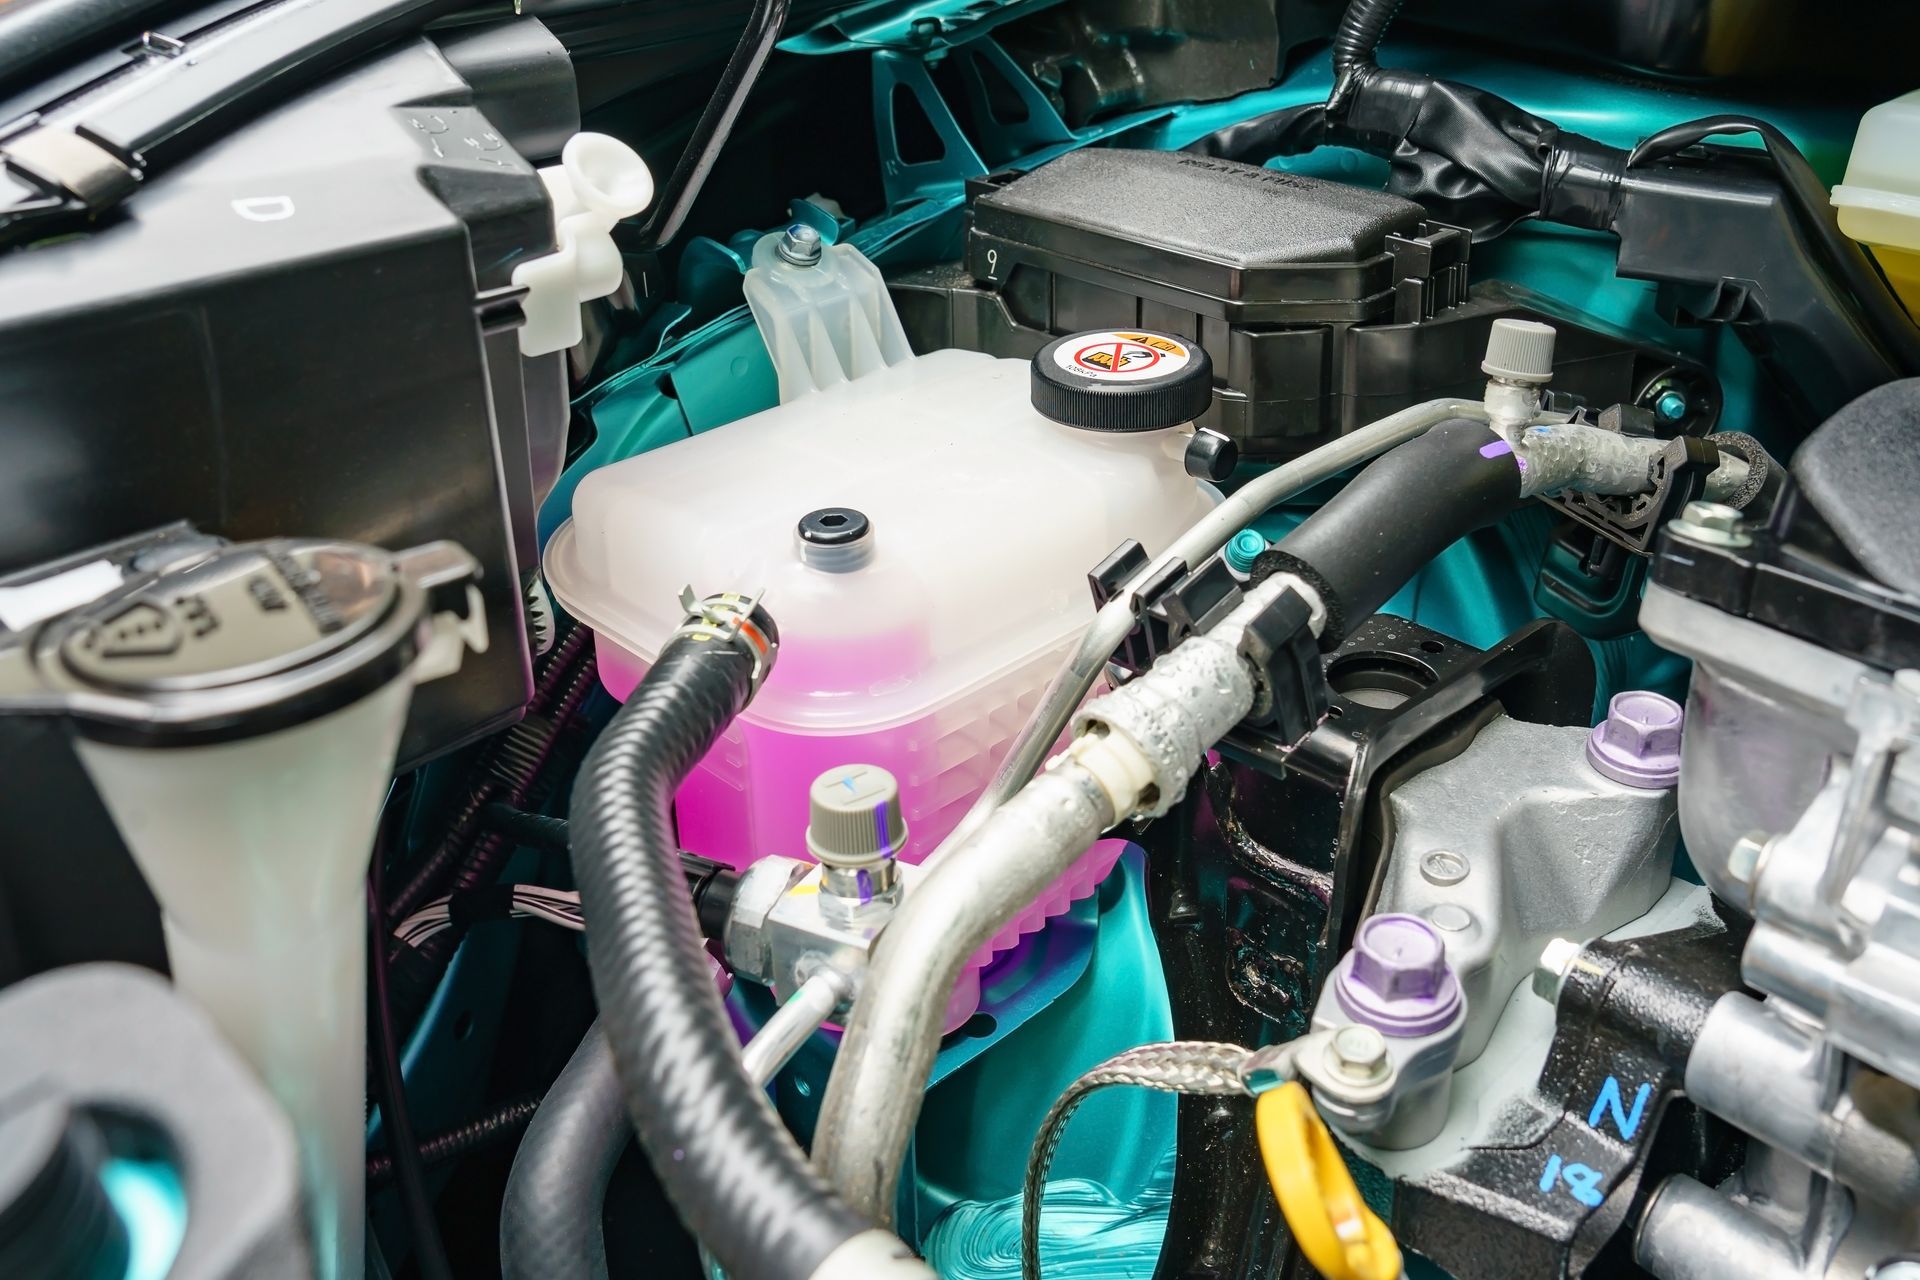 Cooling System Service at ﻿Ryan's Auto Care﻿ in ﻿Lake Mills, WI﻿